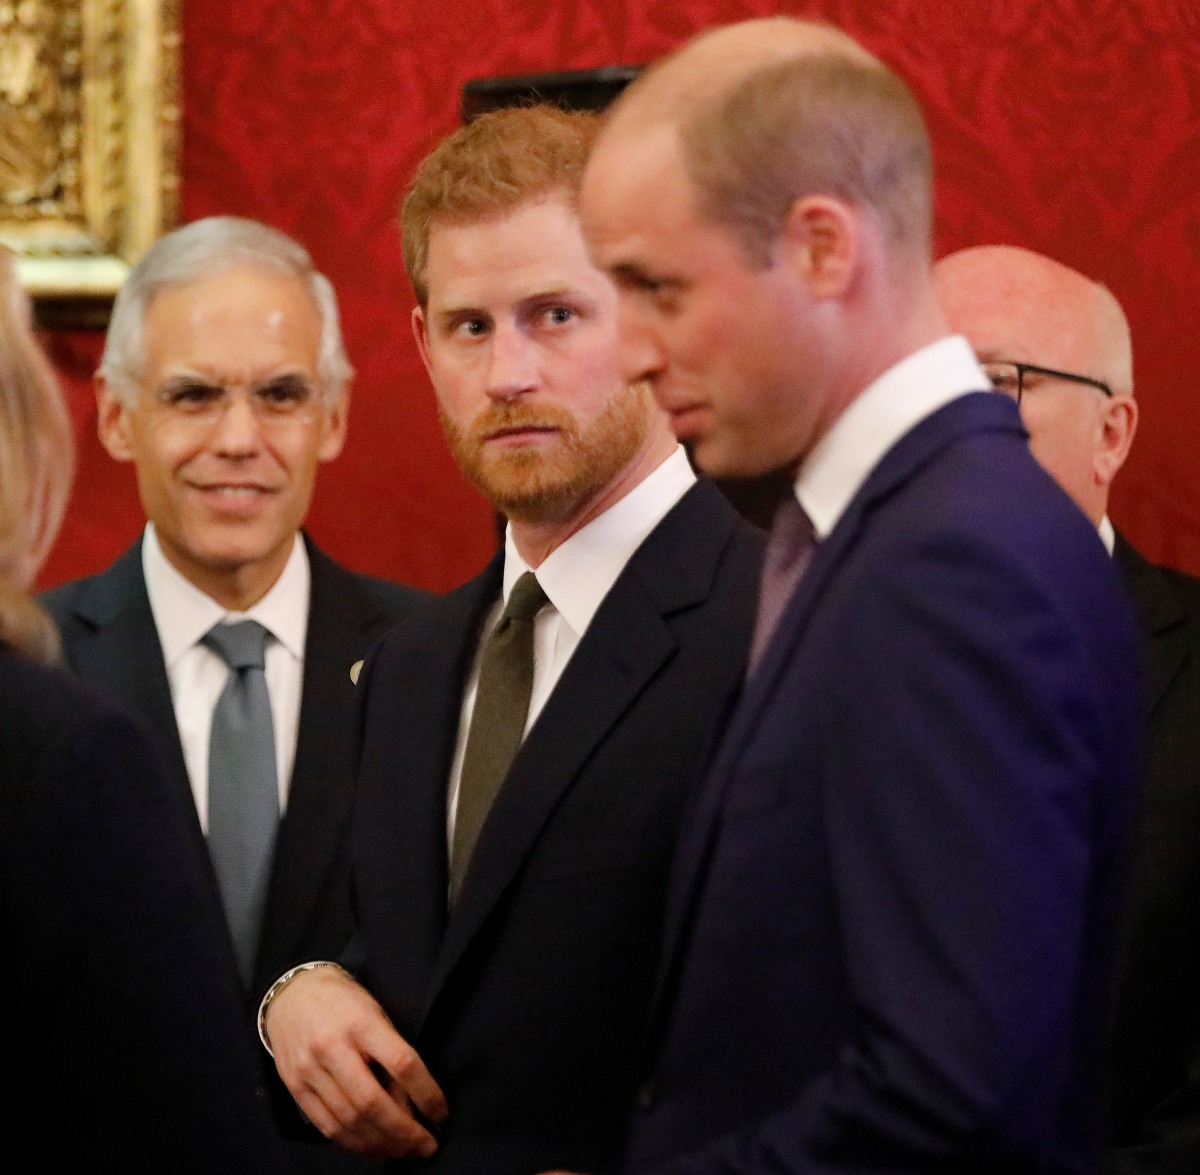 Britain's Prince William, Duke of Cambridge (R) and Britain's Prince Harry, Duke of Sussex (2R), host a reception to officially open the 2018 Illegal Wildlife Trade Conference at St James' Palace in London on October 10, 2018. - The 2018 Illegal Wildlife Trade Conference is the fourth such international conference bringing together heads of state, ministers and officials from nearly 80 countries, alongside NGOs, academics and businesses, to build on previous efforts to tackle this lucrative criminal trade. The conference is being hosted by the UK Government from 11th  12th October 2018.